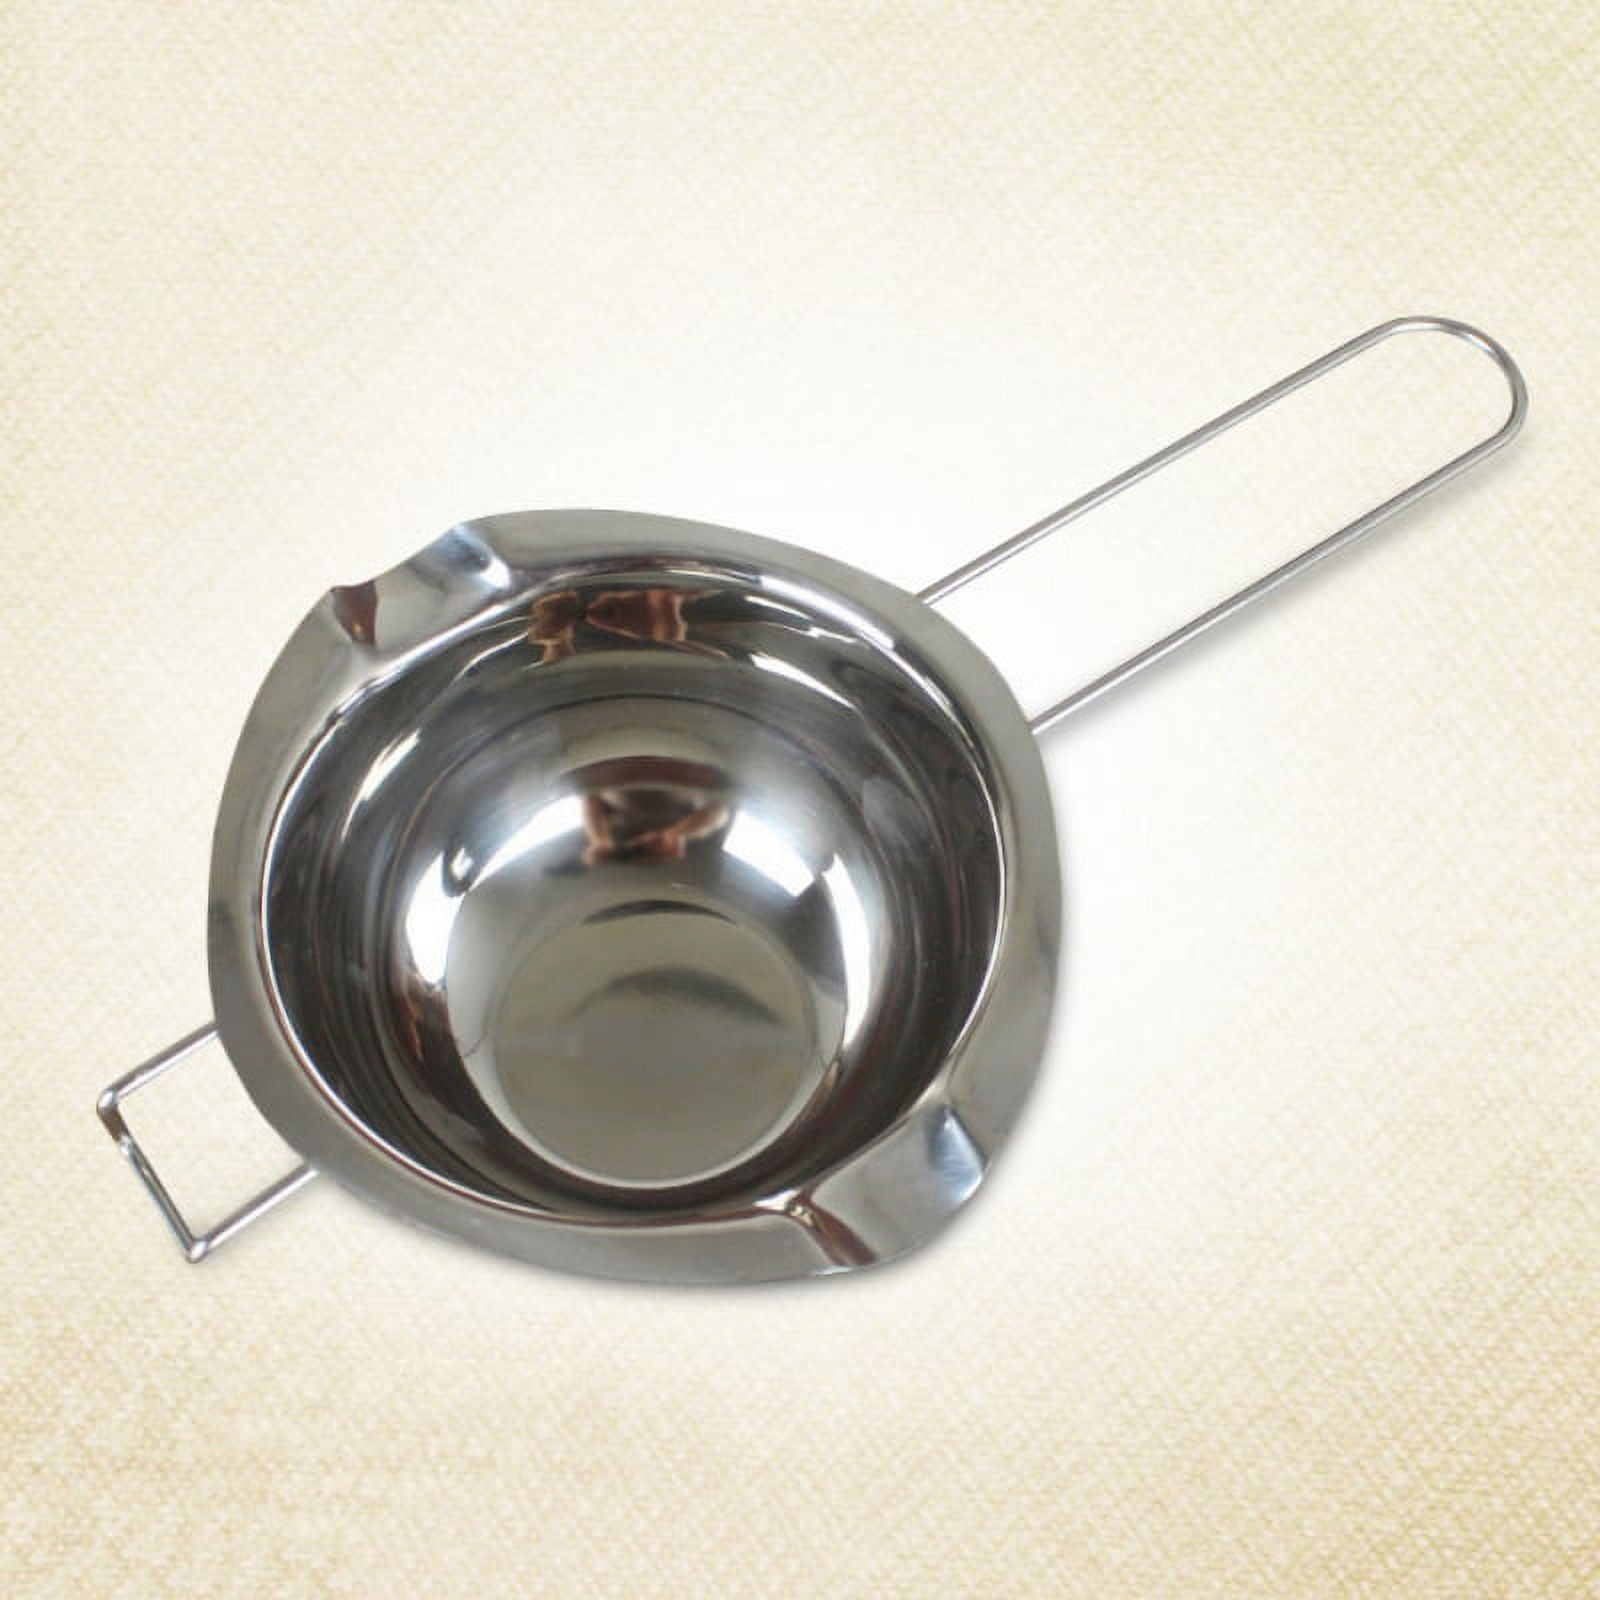 PureLife Double Boiler & Steam Pots for Chocolate and Fondue Melting Pot,  Candle Making - Stainless Steel